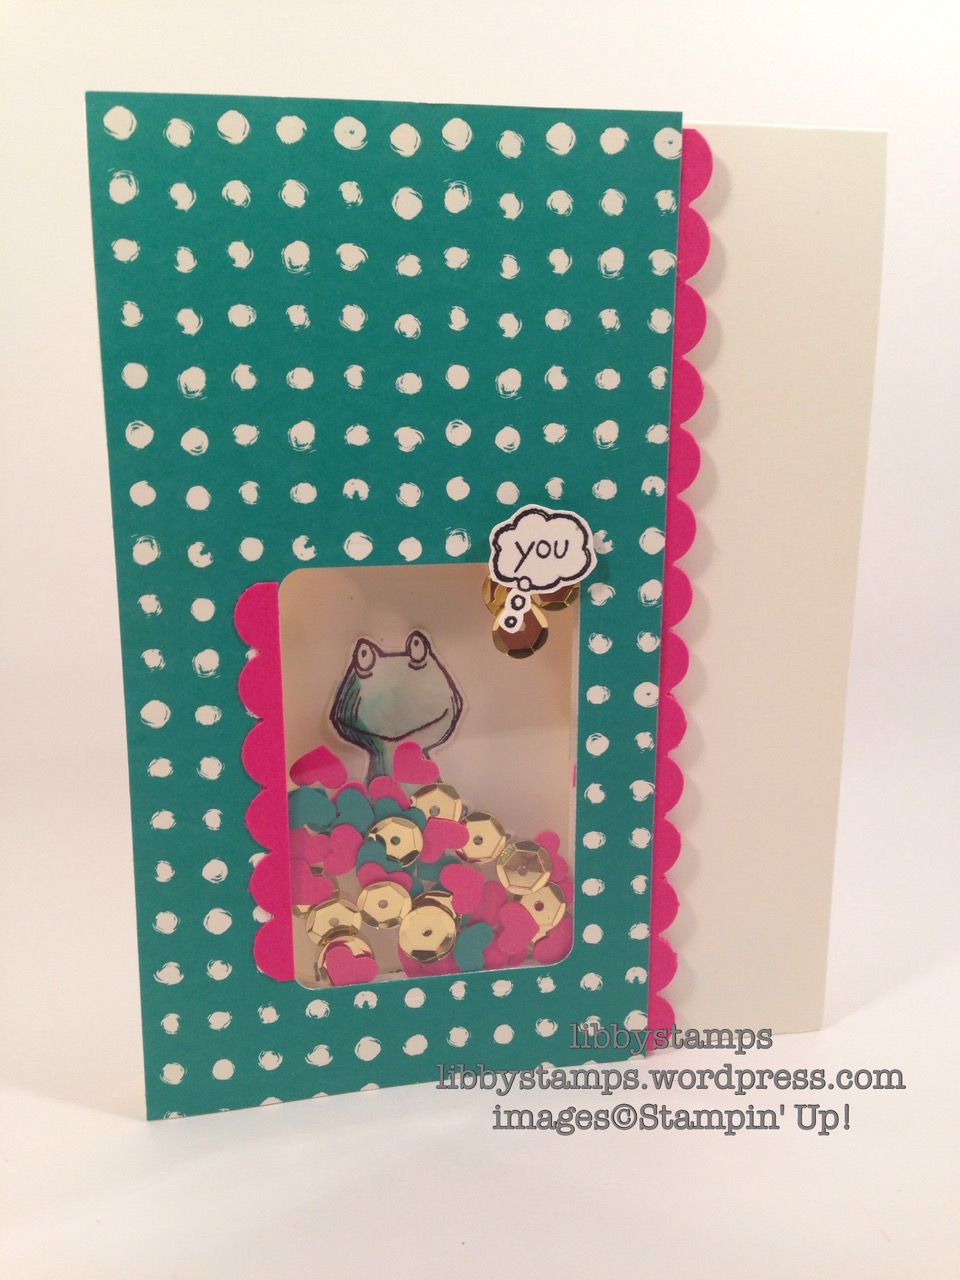 libbystamps, stampin up, Love You Lots, shaker card, TSOT275, Playful Palette DSP, Scallop Edge Border Punch, Hearts Border Punch, 